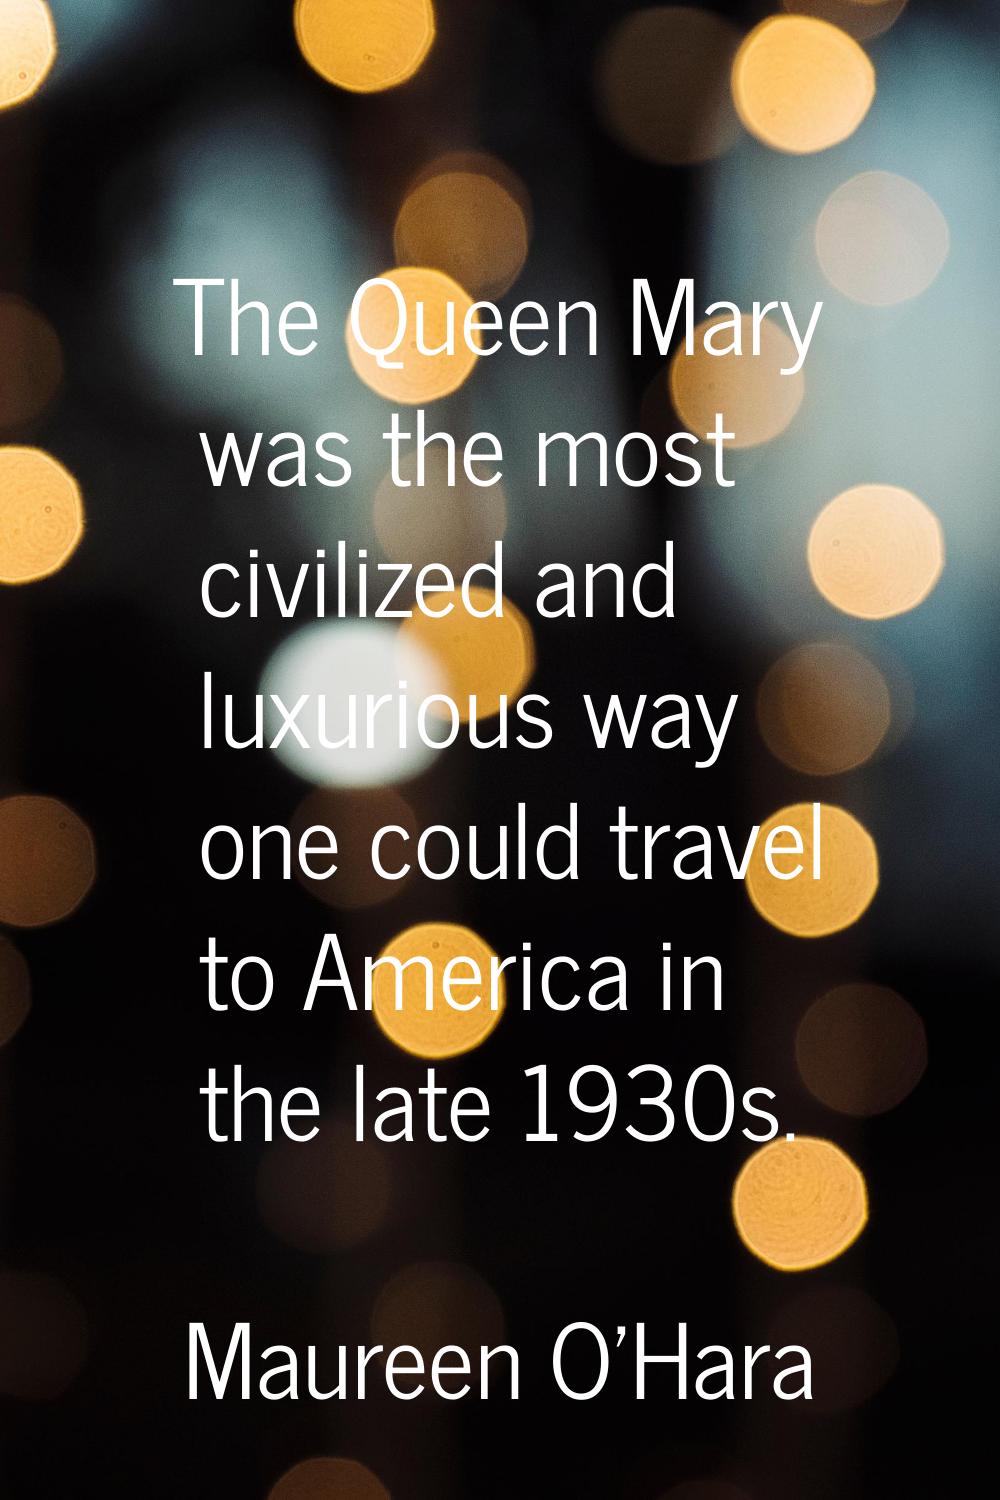 The Queen Mary was the most civilized and luxurious way one could travel to America in the late 193